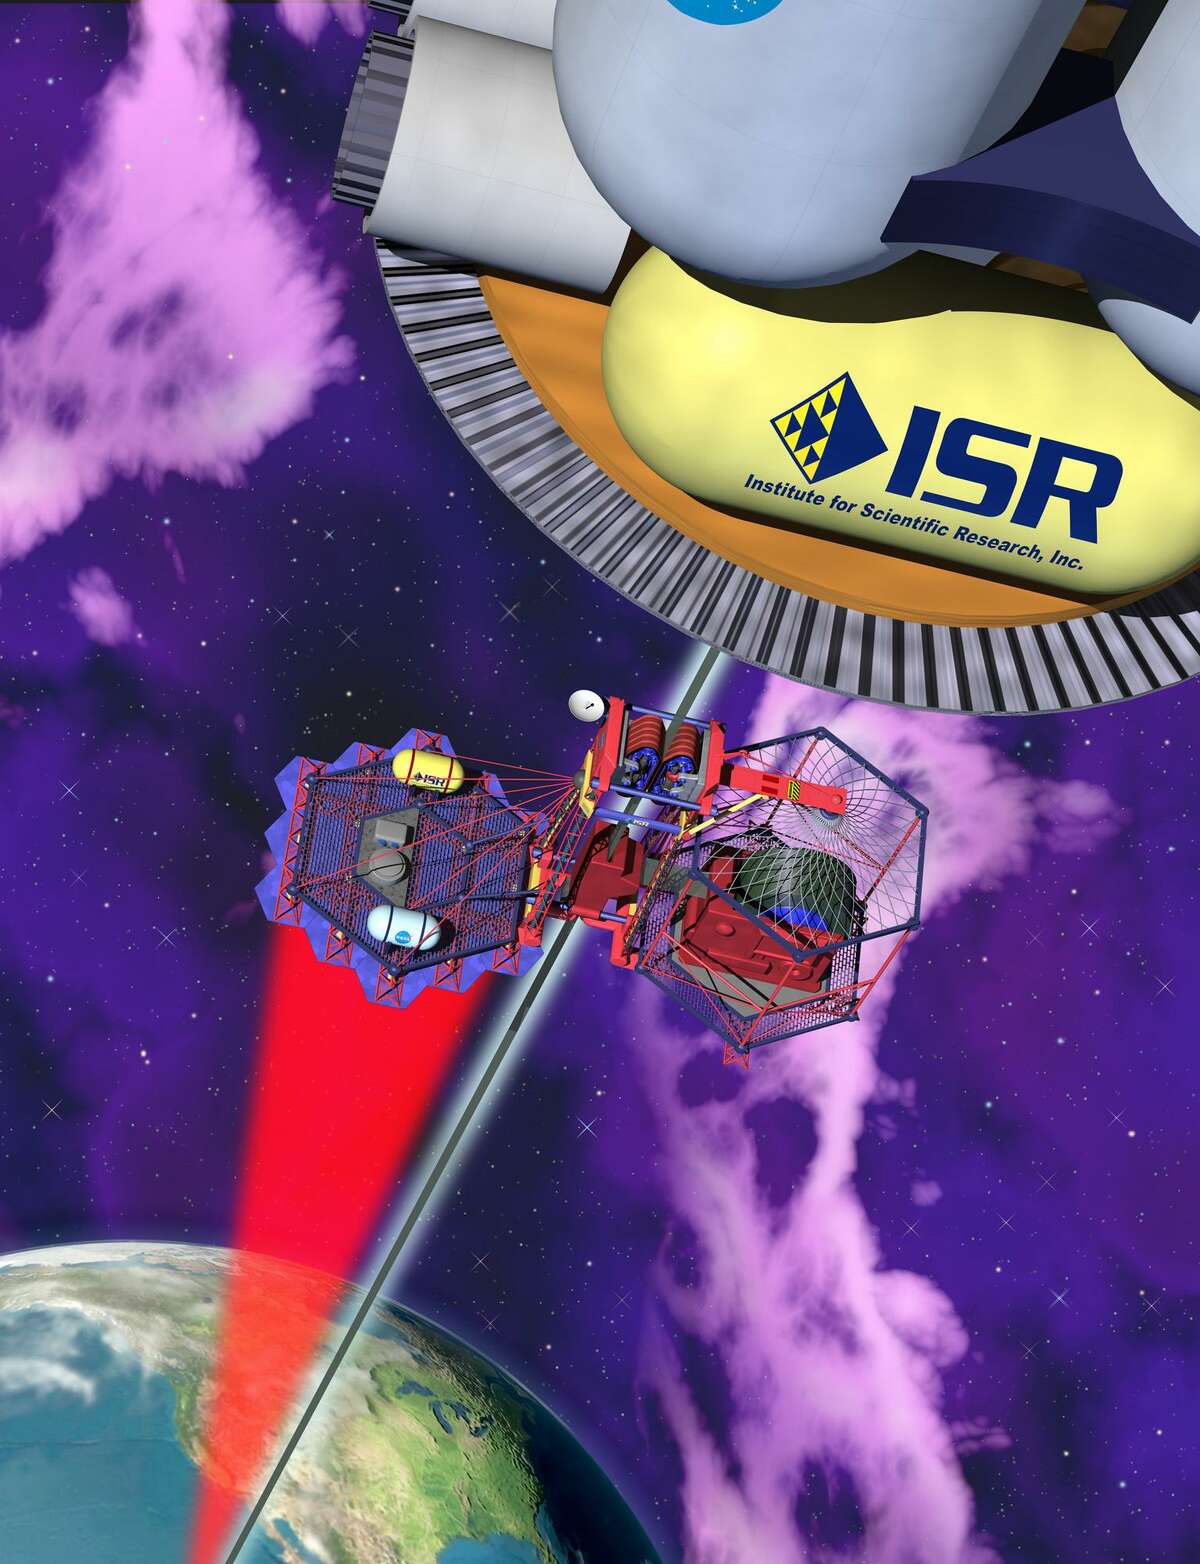 An artist rendering of the proposed space elevator is shown in this undated image released by the Institute for Scientific Research.